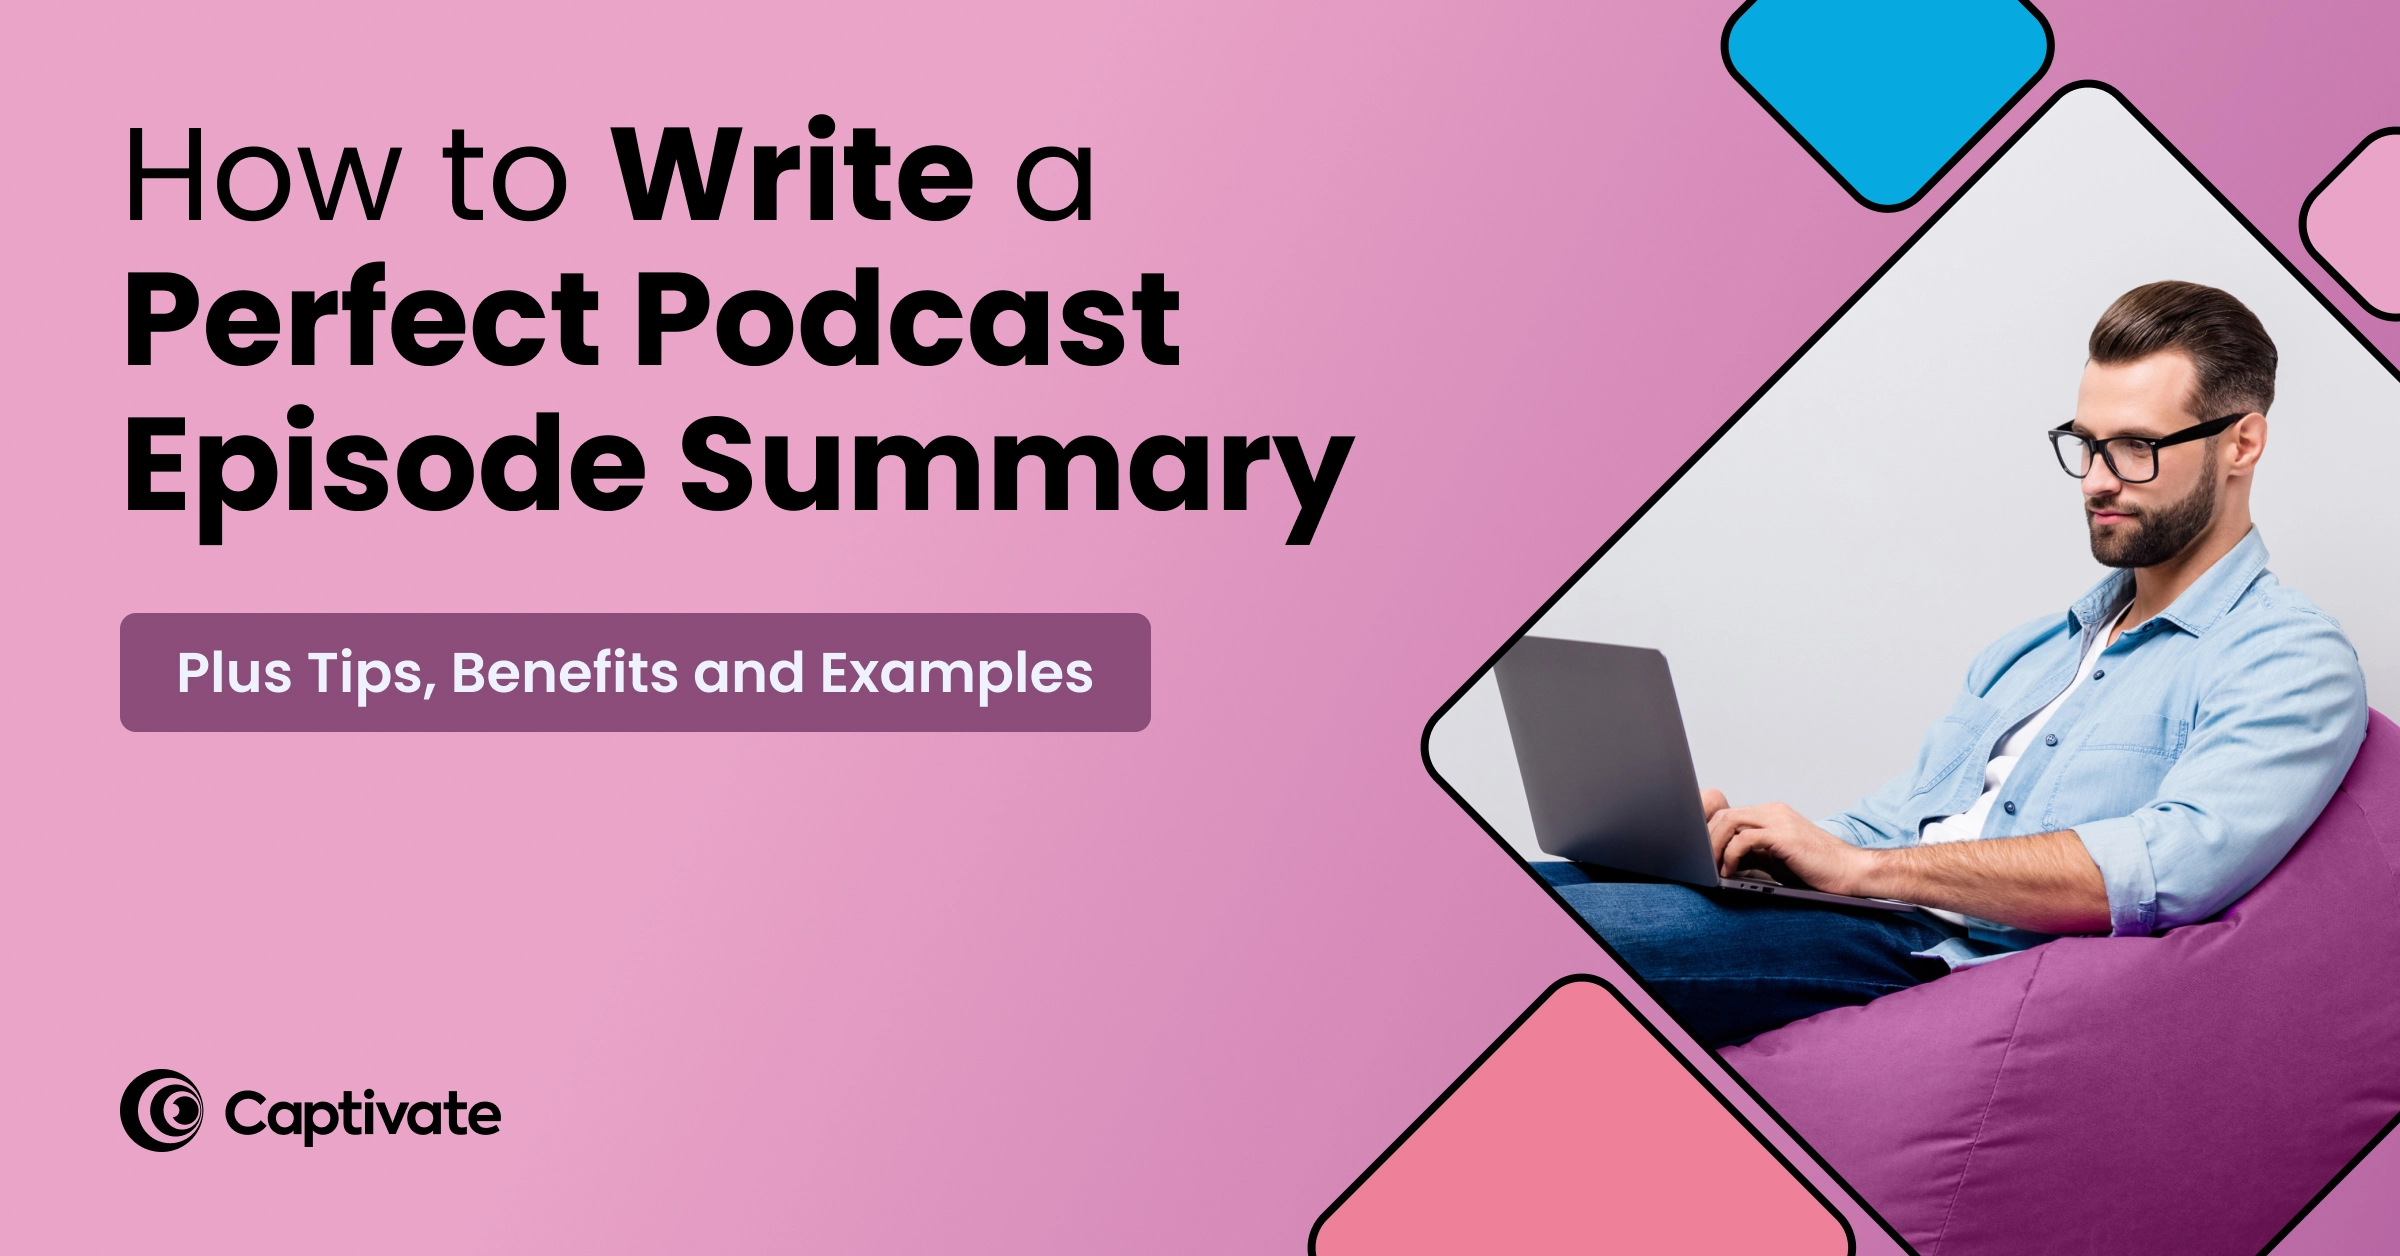 Podcast Categories 2024 Guide - Get Discovered in Apps